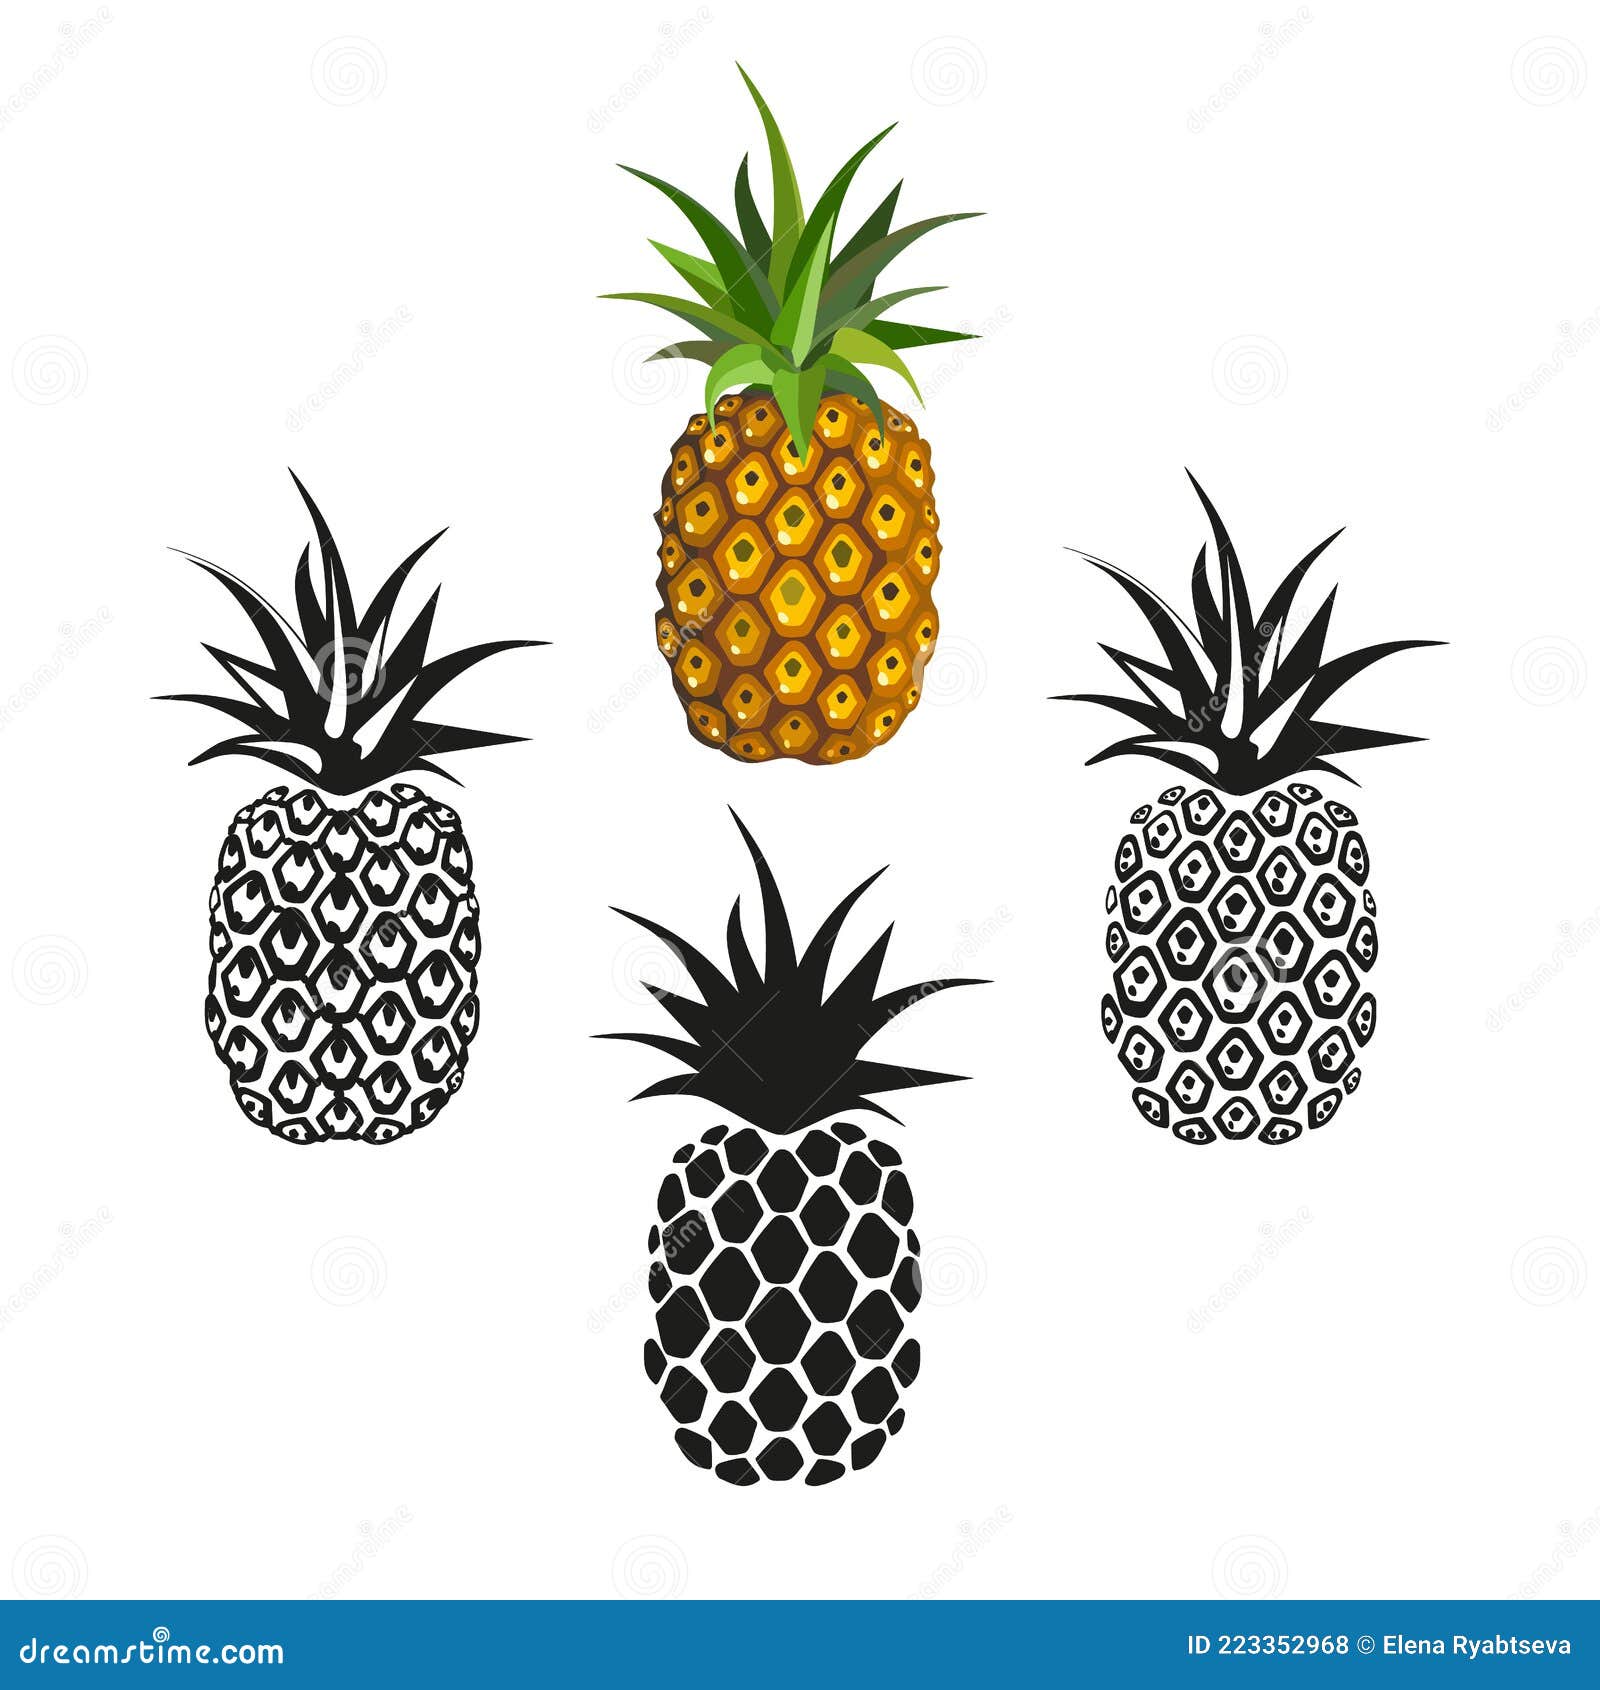 Summer Fruits for Health. Set Pineapple Icons, Black and Colorful on White  Background for Tattoo, Kids Design, Logo Stock Vector - Illustration of  leaf, design: 223352968